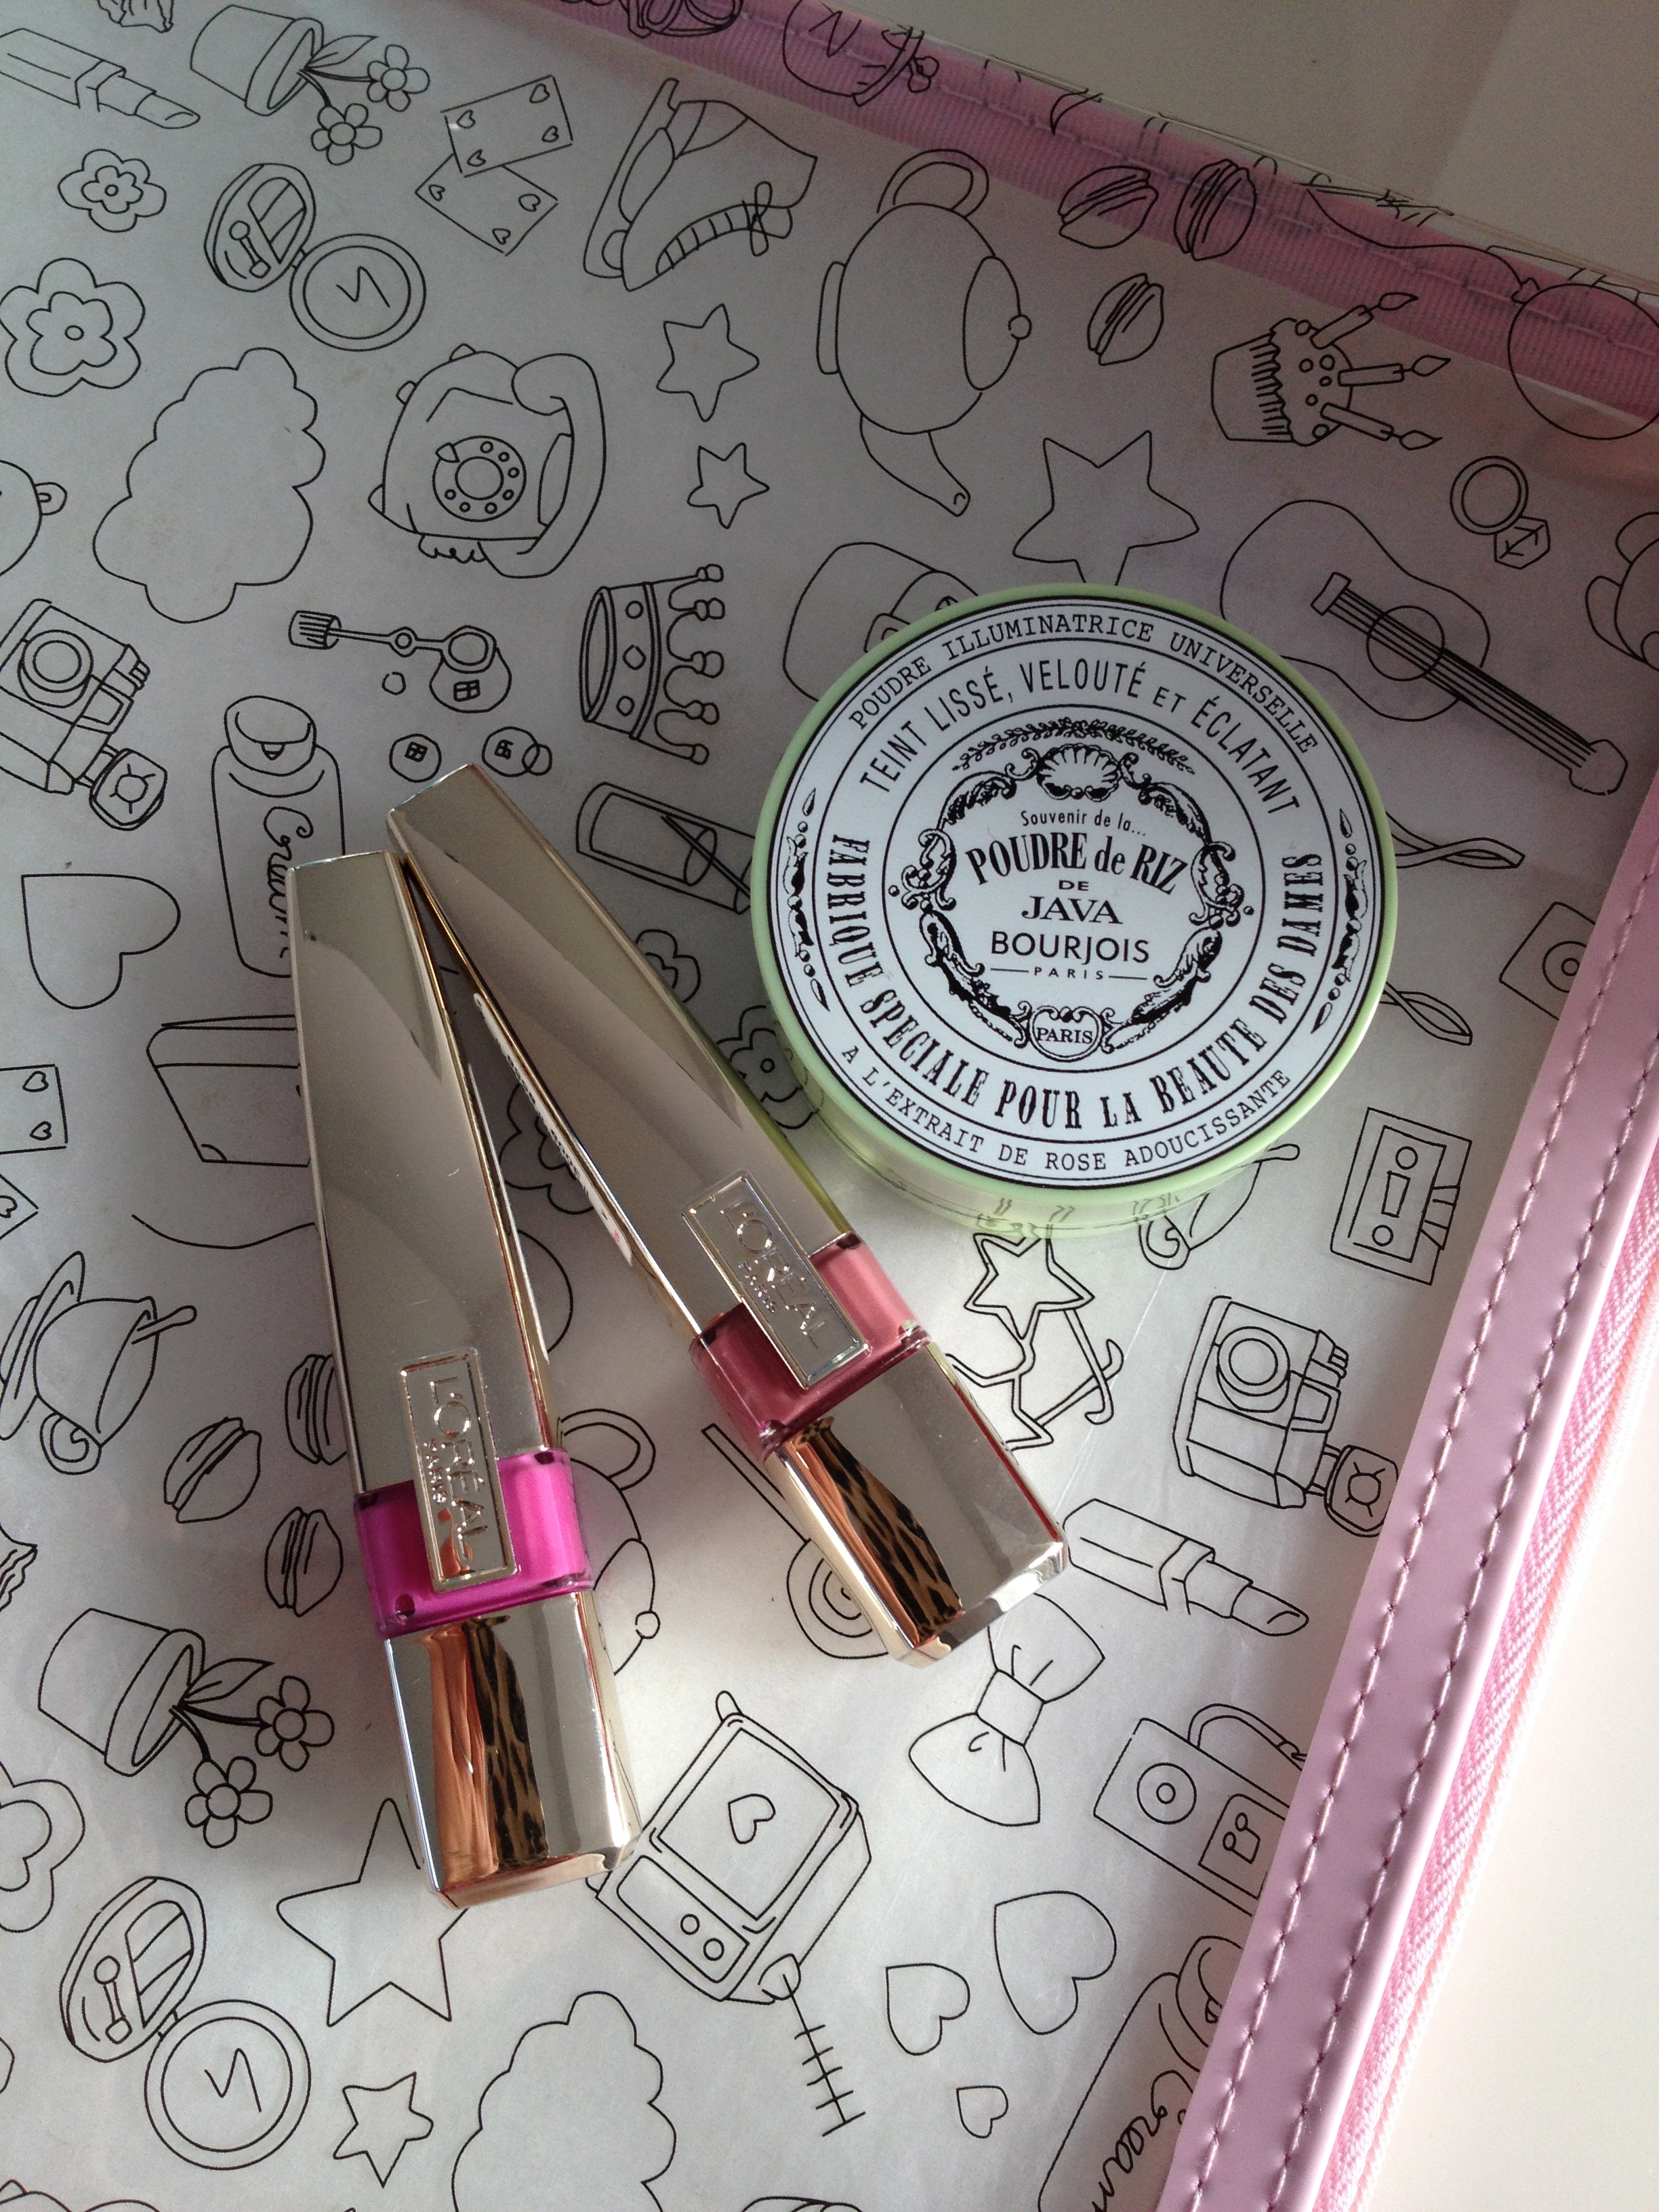  Wash bag from Galeries Lafayette featuring illustrations by the Cherry Blossom Girl, one of my favourite bloggers 